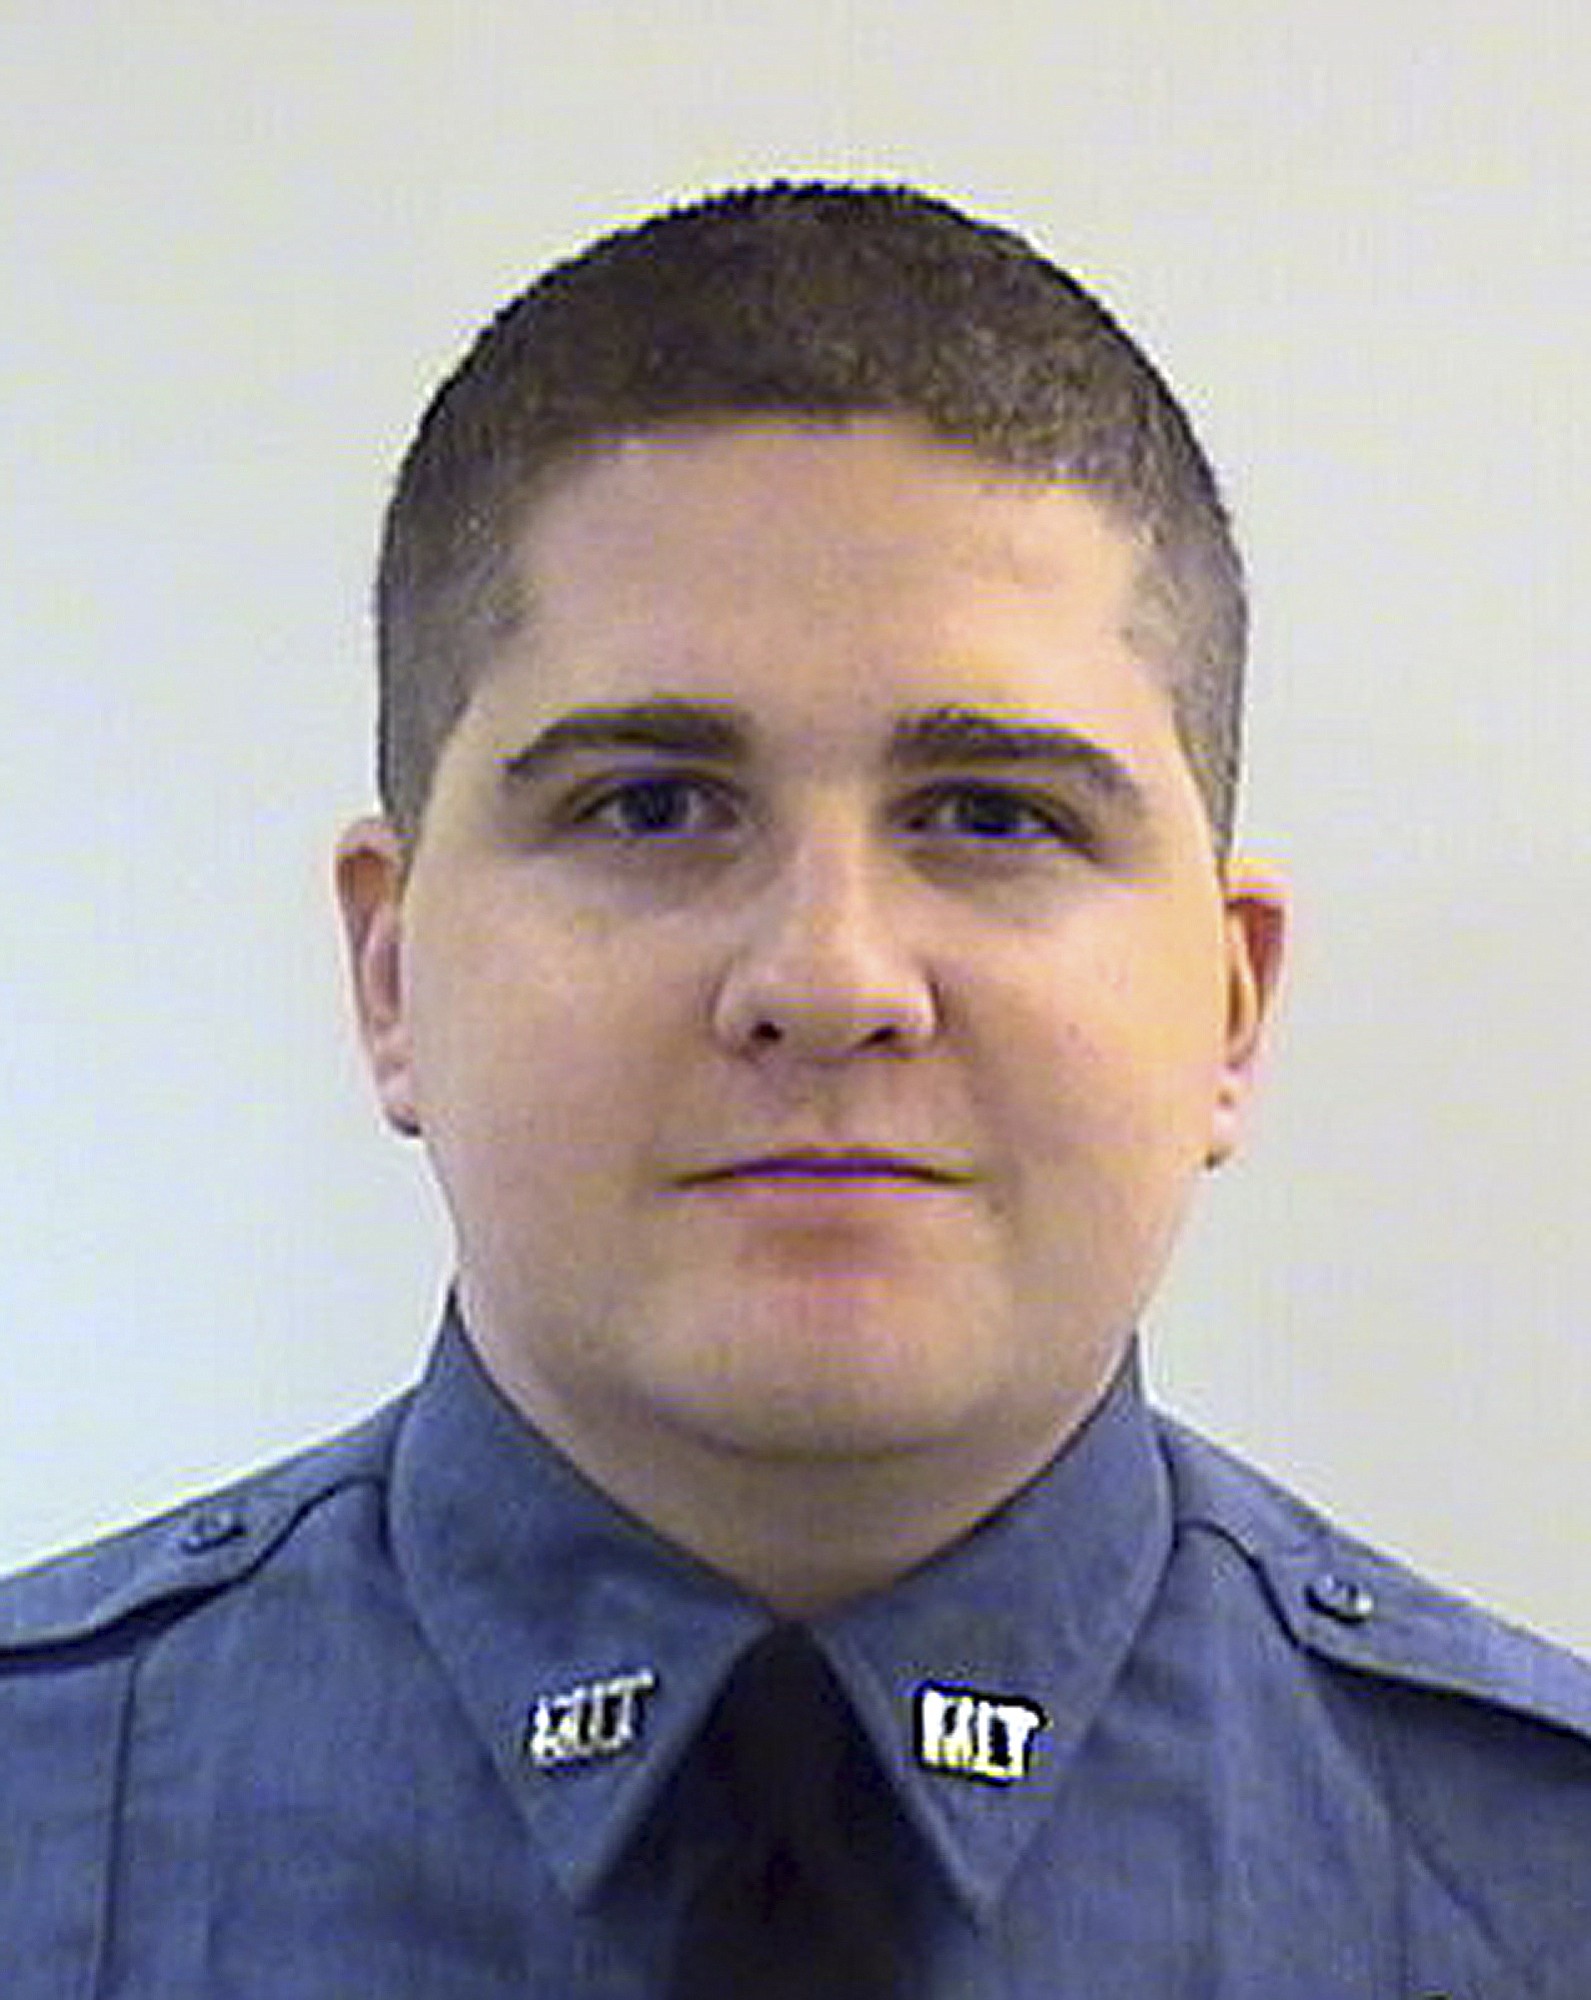 Sean Collier, 26, of Somerville, Mass., was shot to death April 18, 2013, on the school campus in Cambridge, Mass.